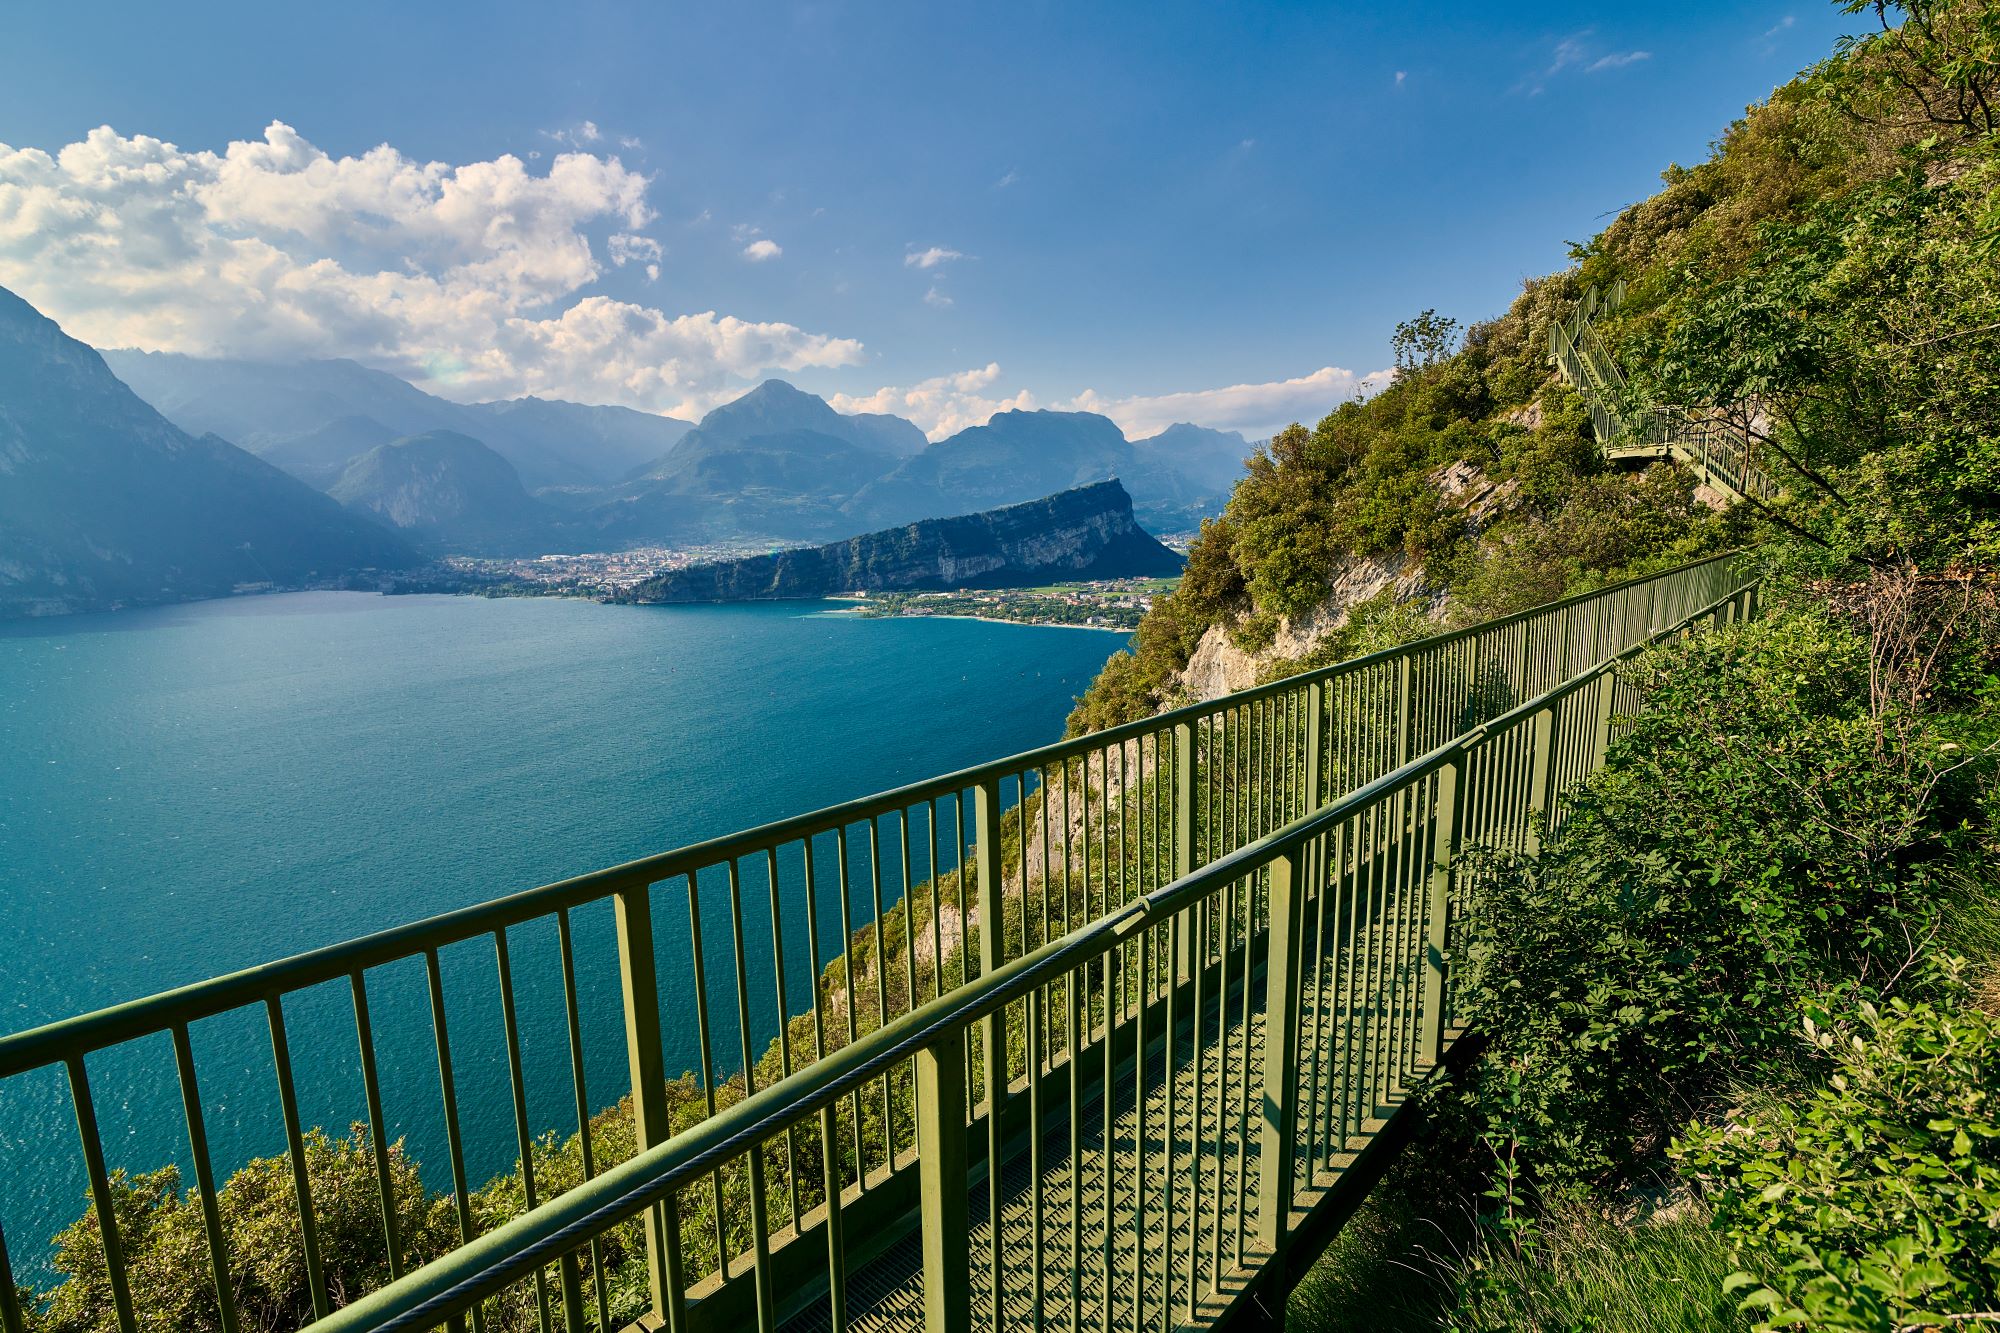 Busatte-Tempesta Trail with a view of Lake Garda